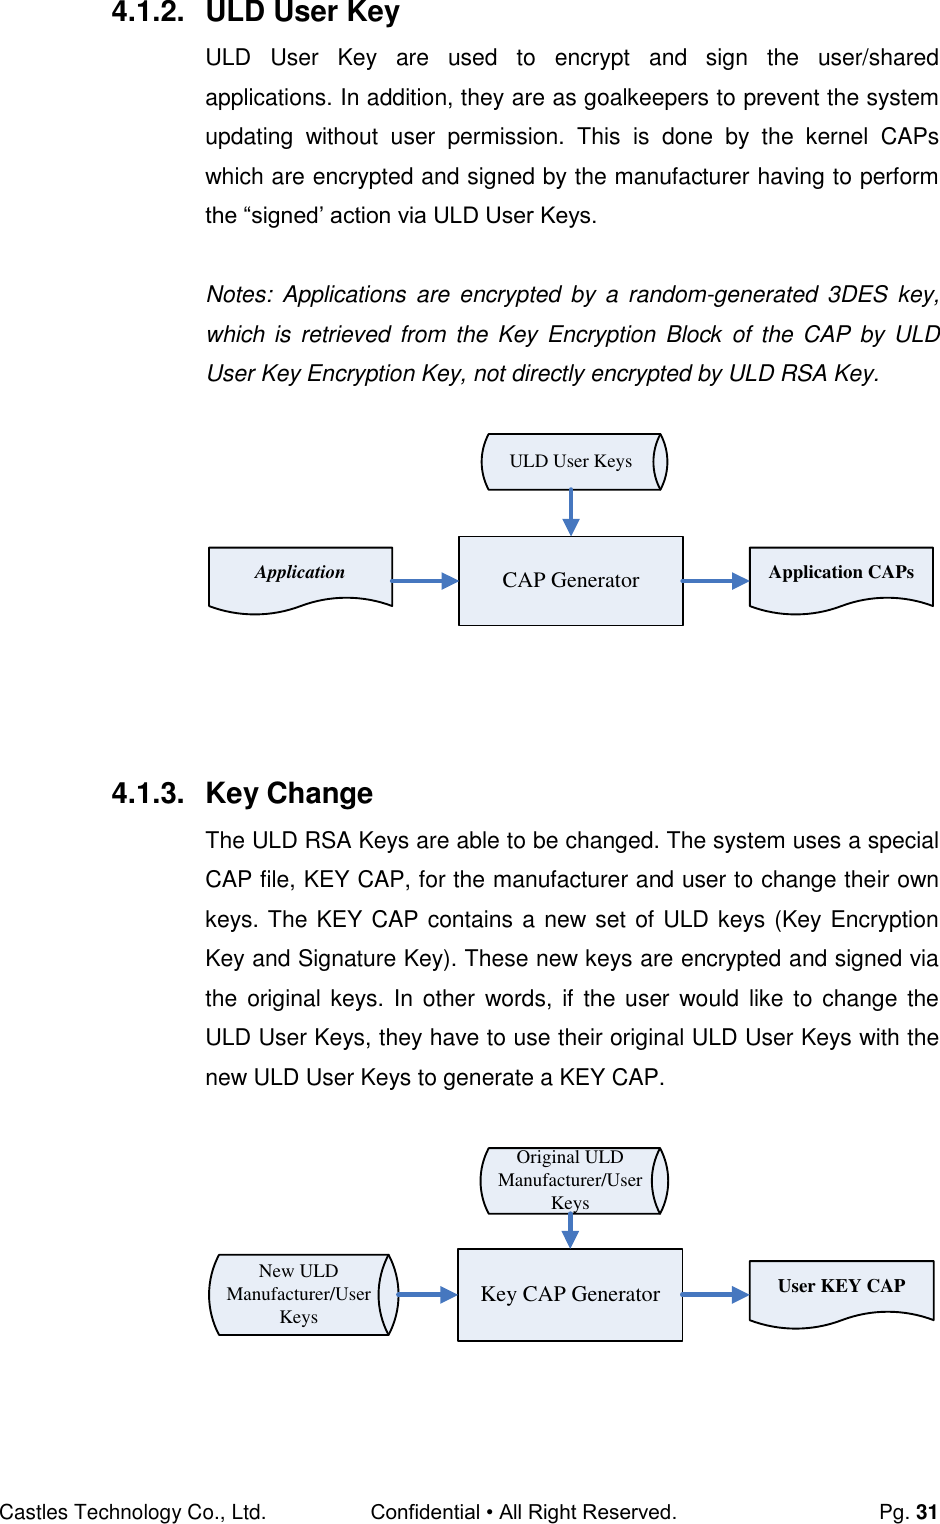 Castles Technology Co., Ltd. Confidential • All Right Reserved.  Pg. 31 4.1.2.  ULD User Key ULD  User  Key  are  used  to  encrypt  and  sign  the  user/shared applications. In addition, they are as goalkeepers to prevent the system updating  without  user  permission.  This  is  done  by  the  kernel  CAPs which are encrypted and signed by the manufacturer having to perform the “signed’ action via ULD User Keys.  Notes:  Applications  are  encrypted  by  a  random-generated  3DES  key, which is  retrieved  from  the  Key  Encryption  Block  of the  CAP  by  ULD User Key Encryption Key, not directly encrypted by ULD RSA Key.  Application Application CAPsULD User KeysCAP Generator     4.1.3.  Key Change The ULD RSA Keys are able to be changed. The system uses a special CAP file, KEY CAP, for the manufacturer and user to change their own keys. The KEY CAP contains a new set of ULD keys (Key Encryption Key and Signature Key). These new keys are encrypted and signed via the  original keys. In  other  words, if the user would like to change  the ULD User Keys, they have to use their original ULD User Keys with the new ULD User Keys to generate a KEY CAP.  Key CAP GeneratorOriginal ULD Manufacturer/User KeysNew ULD Manufacturer/User KeysUser KEY CAP    